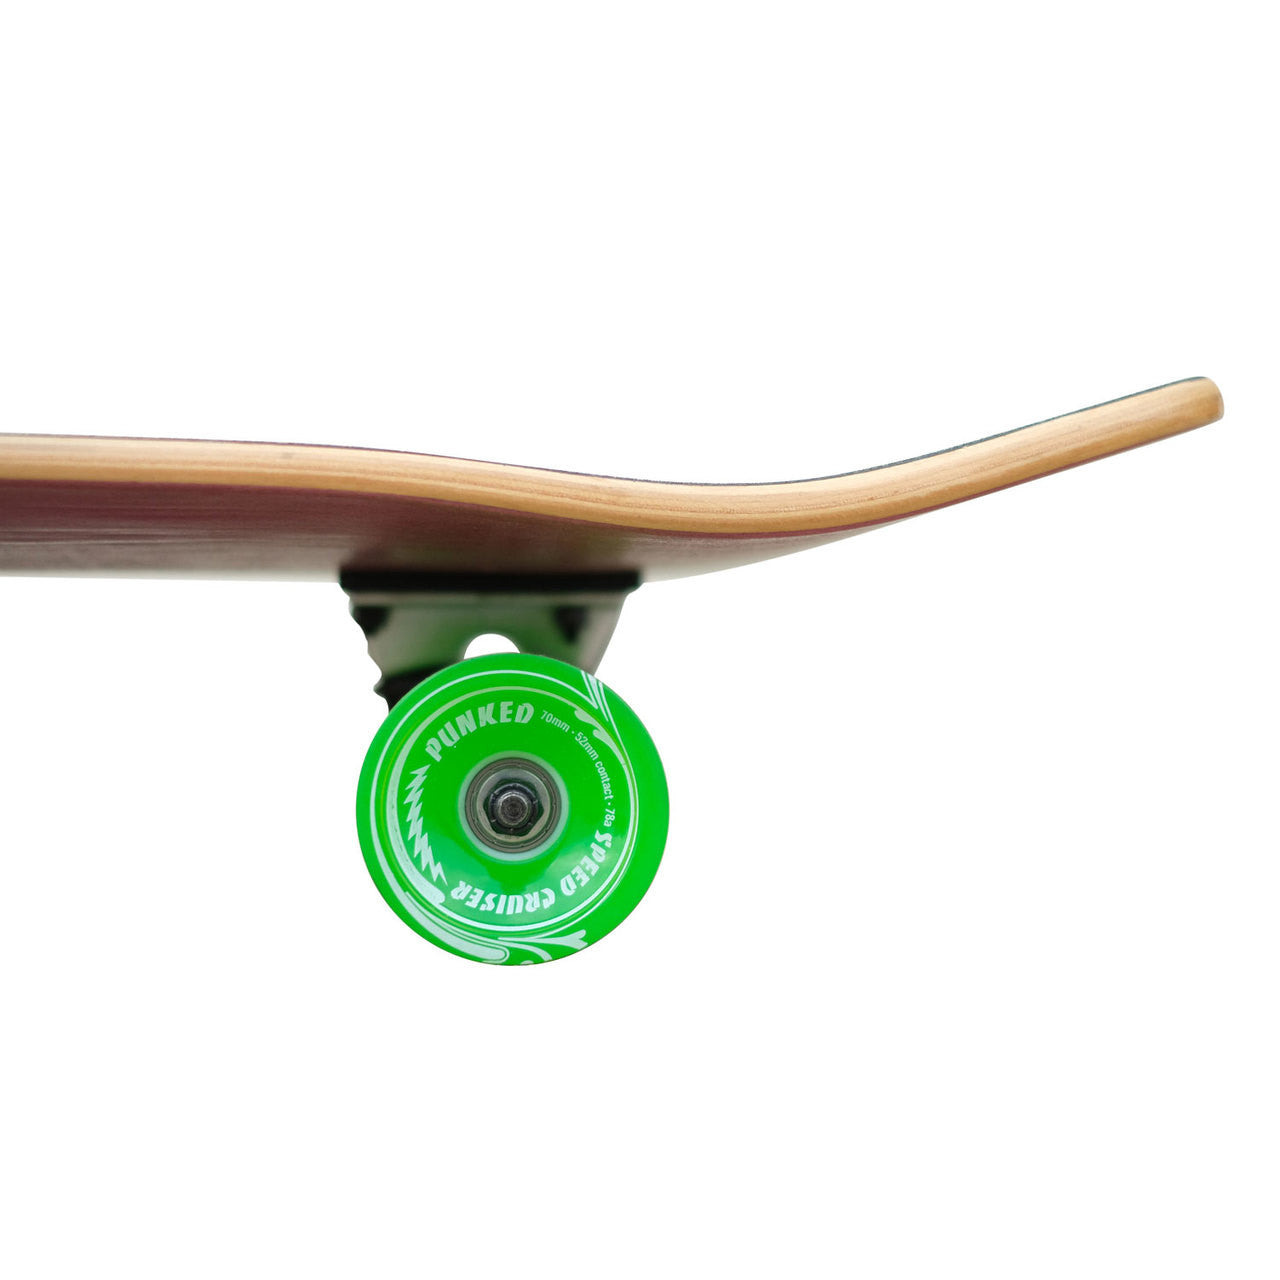 Yocaher Old School Longboard Complete - Countdown